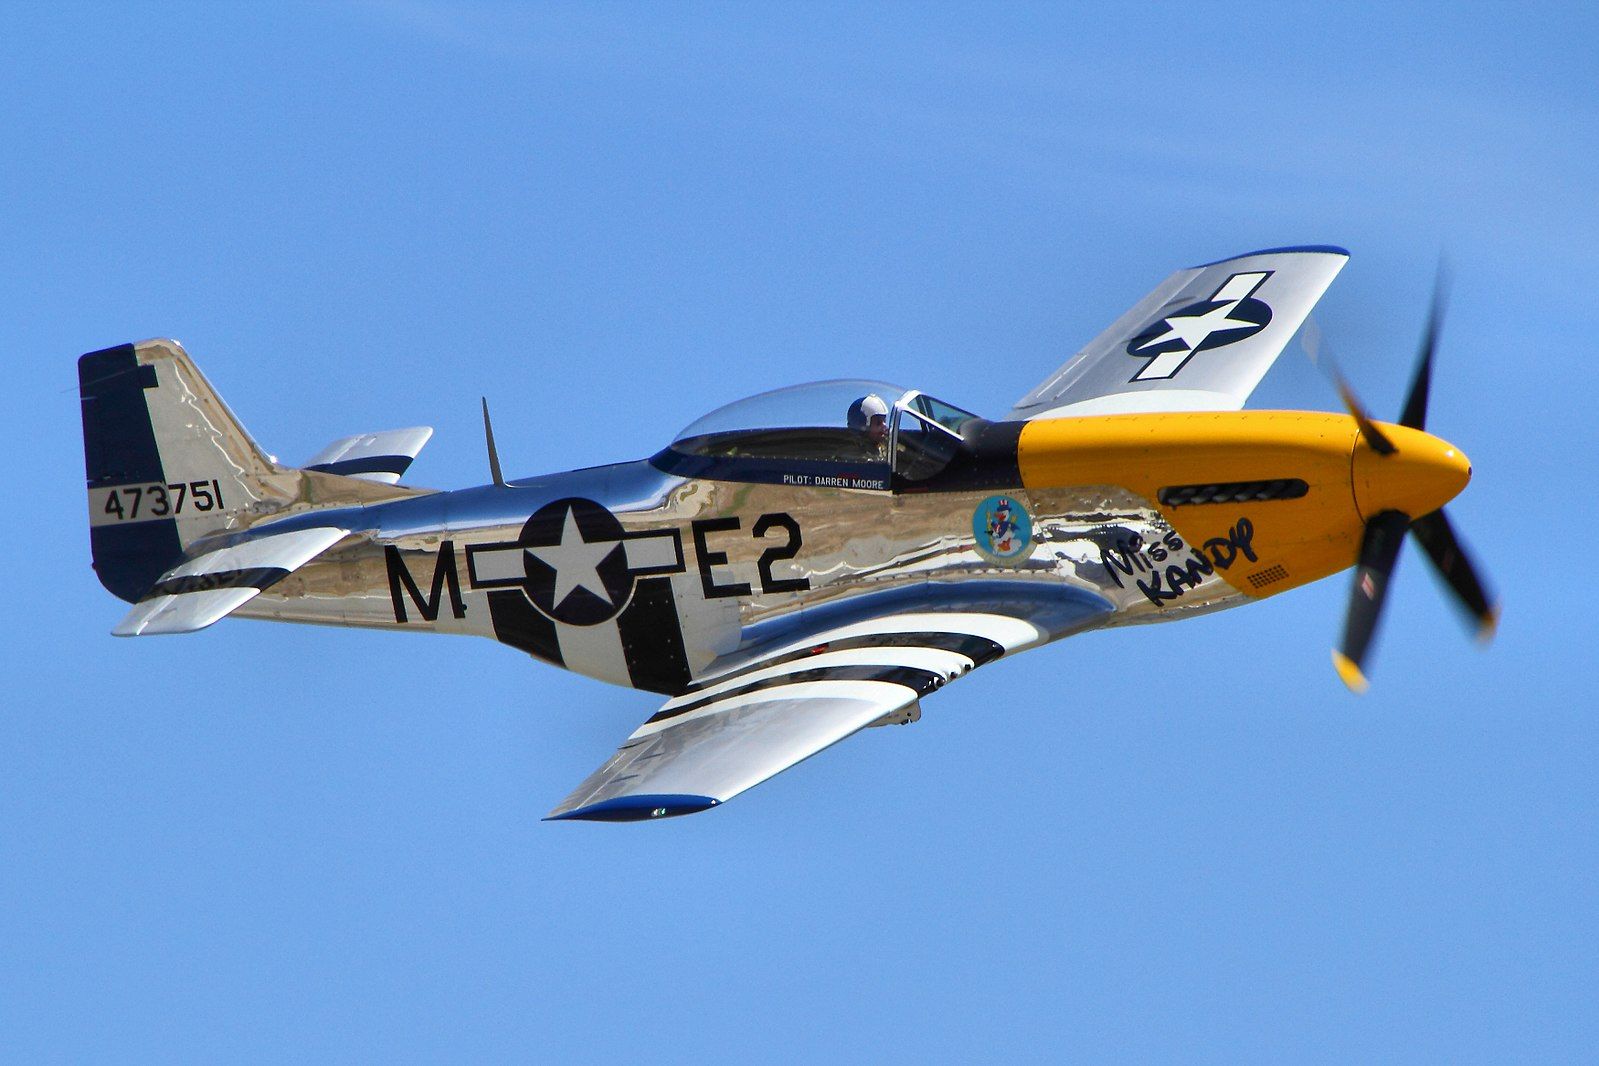 A P51 Mustang flying in the sky.